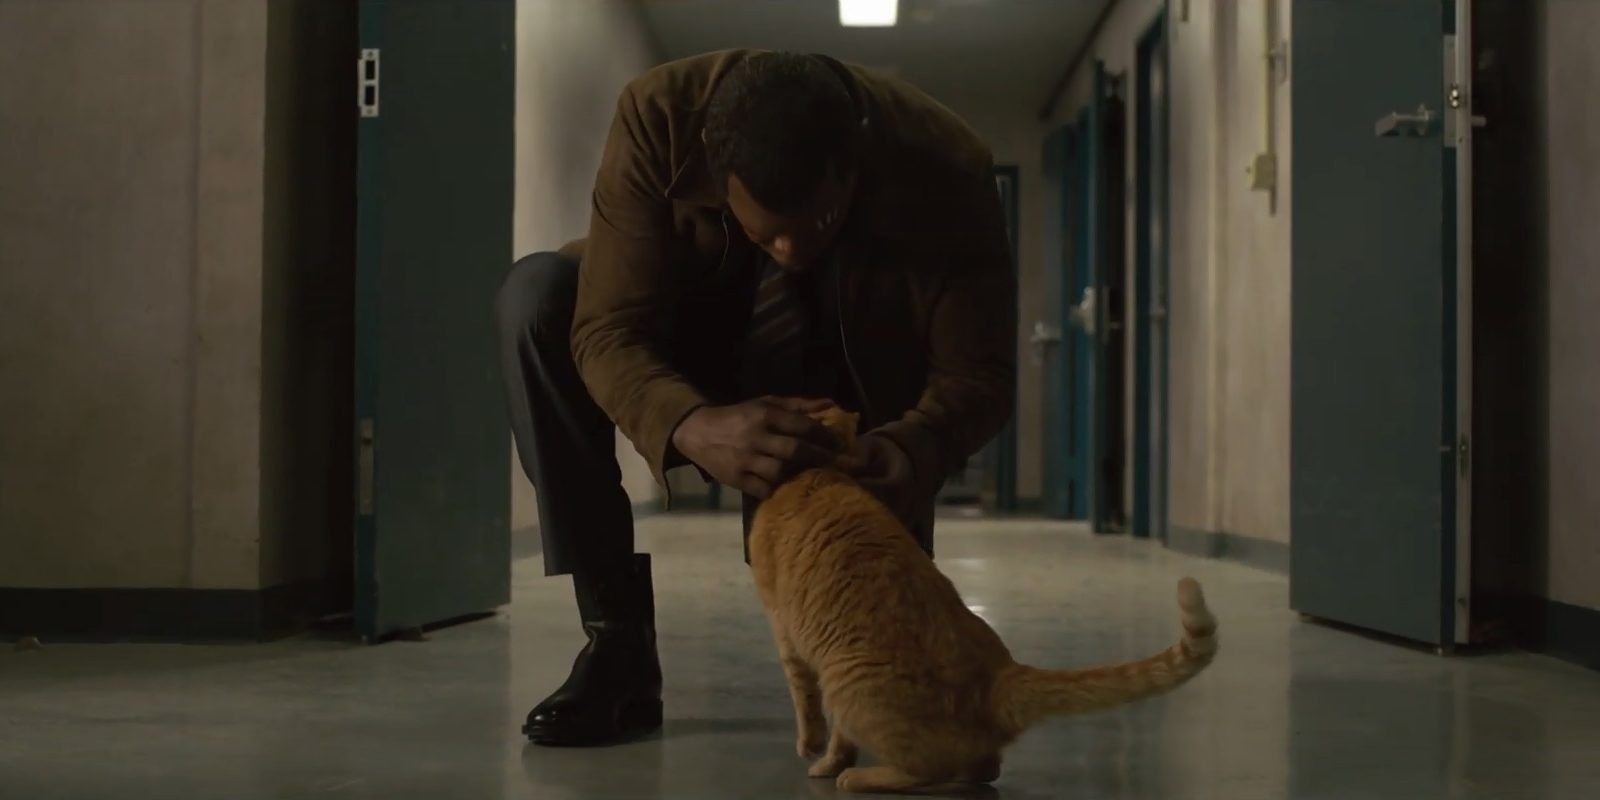 Nick Fury and Goose in Captain Marvel